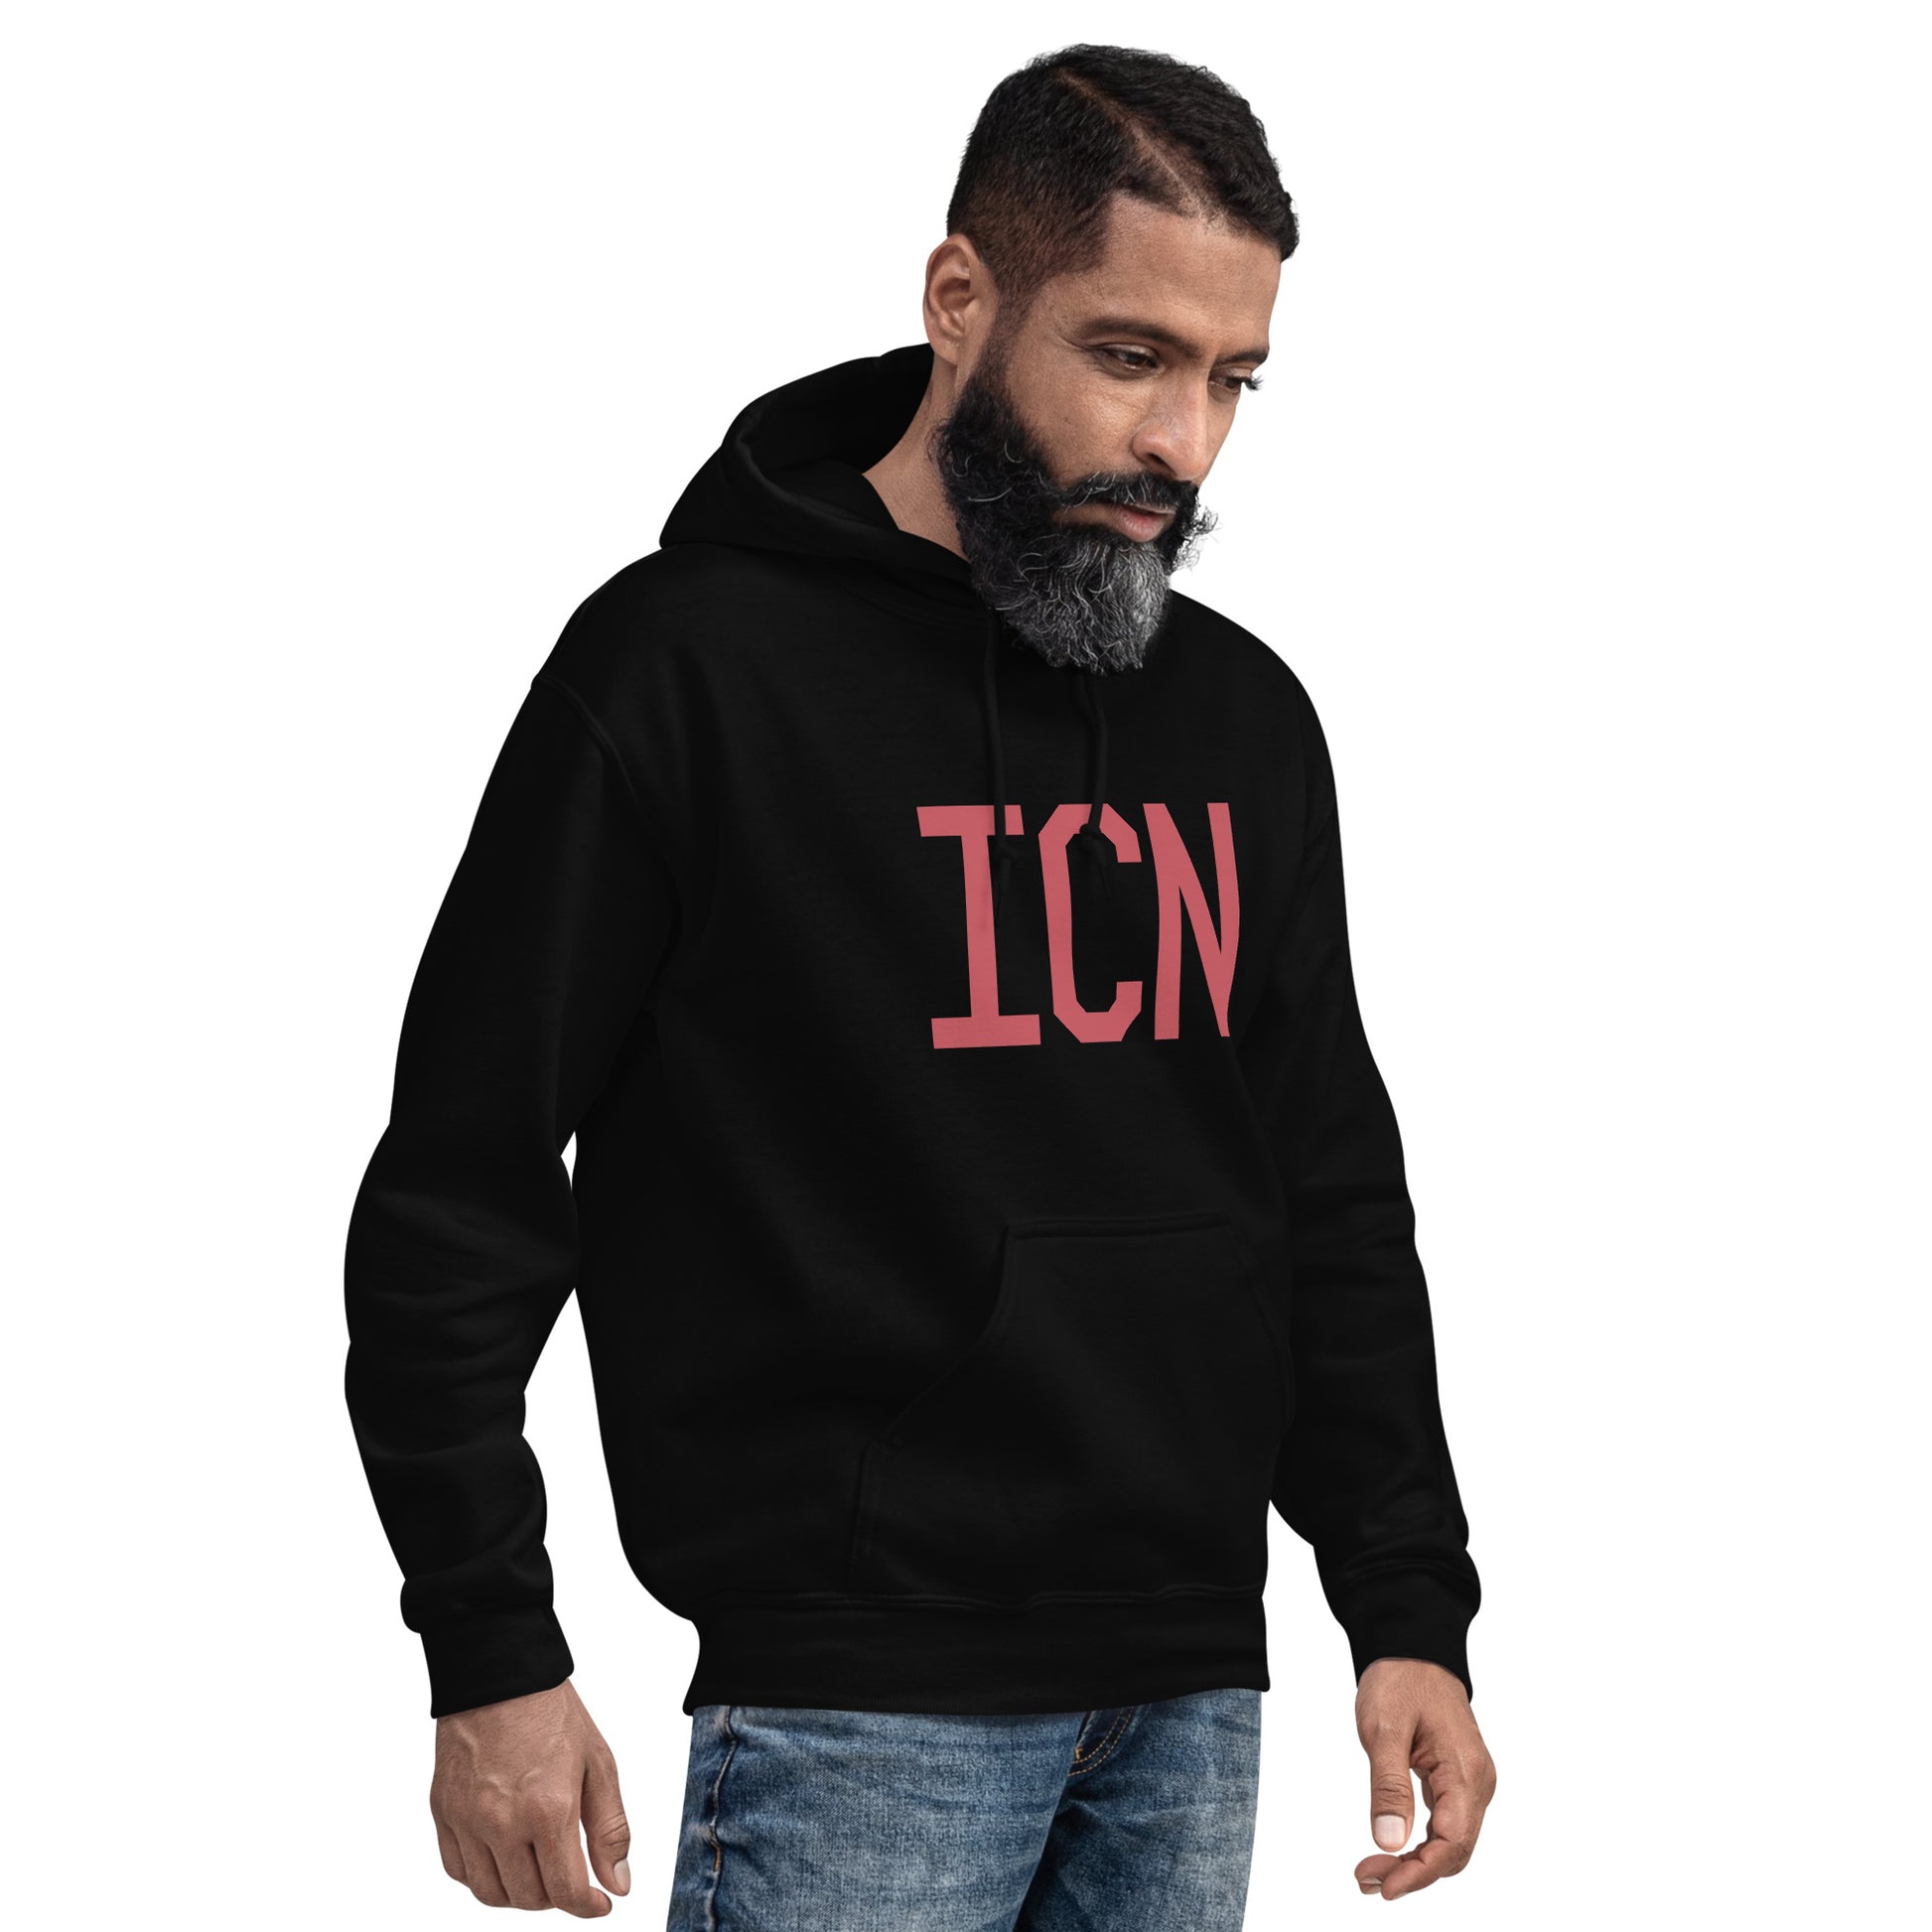 Aviation Enthusiast Hoodie - Deep Pink Graphic • ICN Seoul • YHM Designs - Image 06